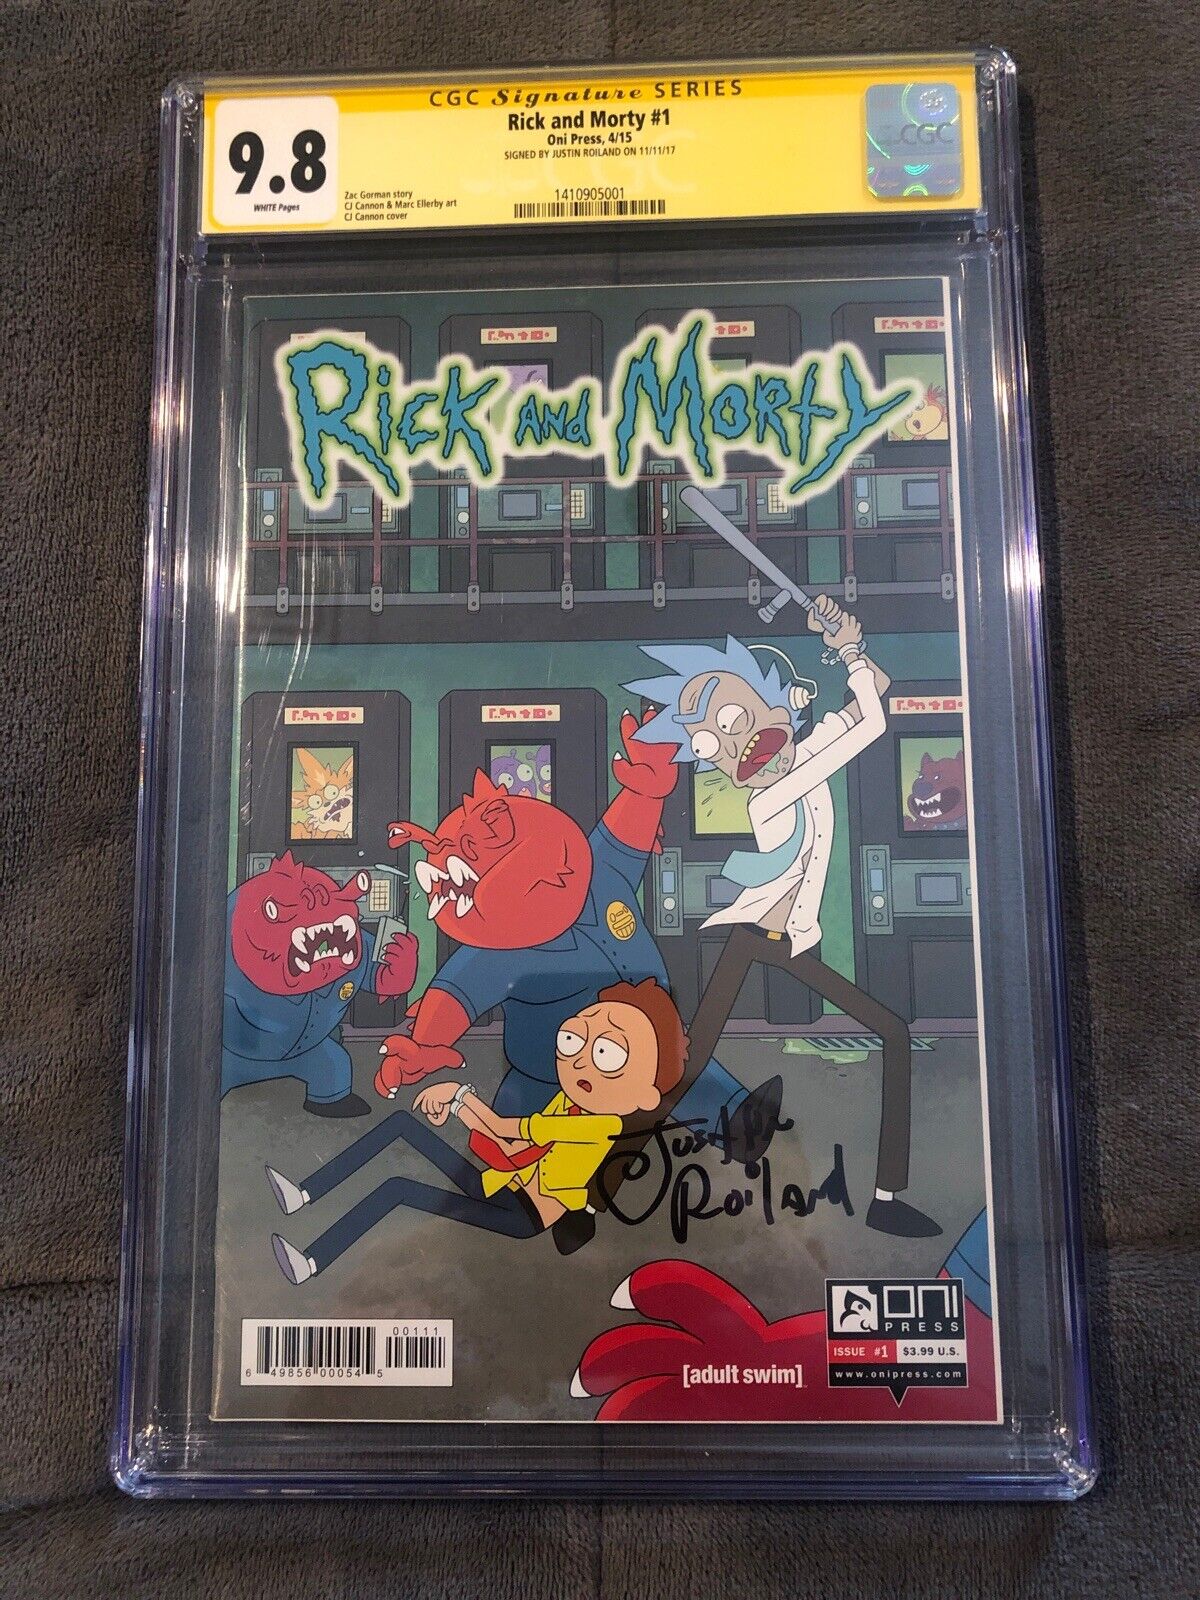 Justin Roiland Signed 9.8 CGC First Print Rick And Morty Comic 1 4/15